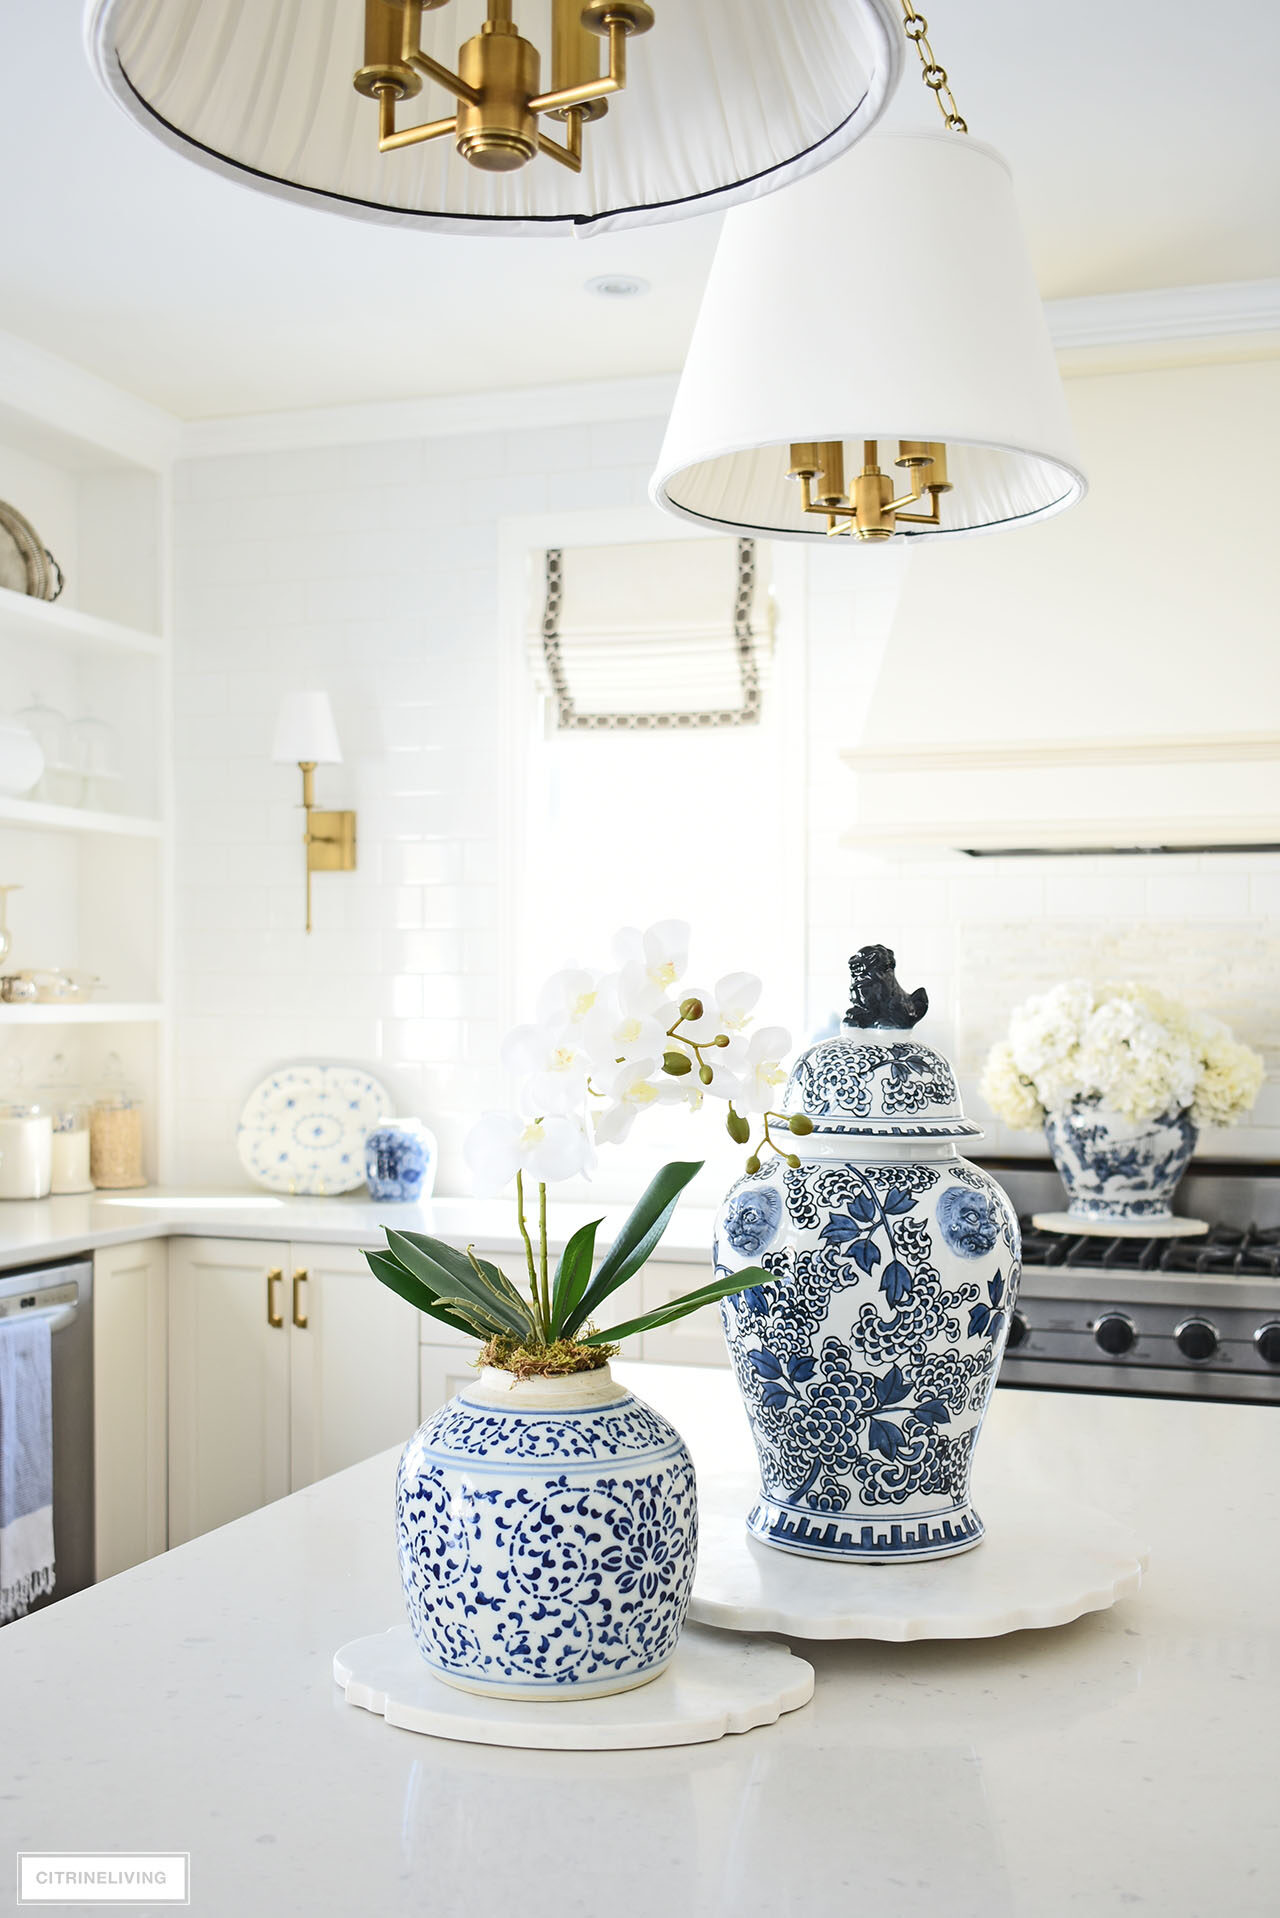 Kitchen island decorated for spring with blue and white ginger jars and an elegant orchid arrangement.